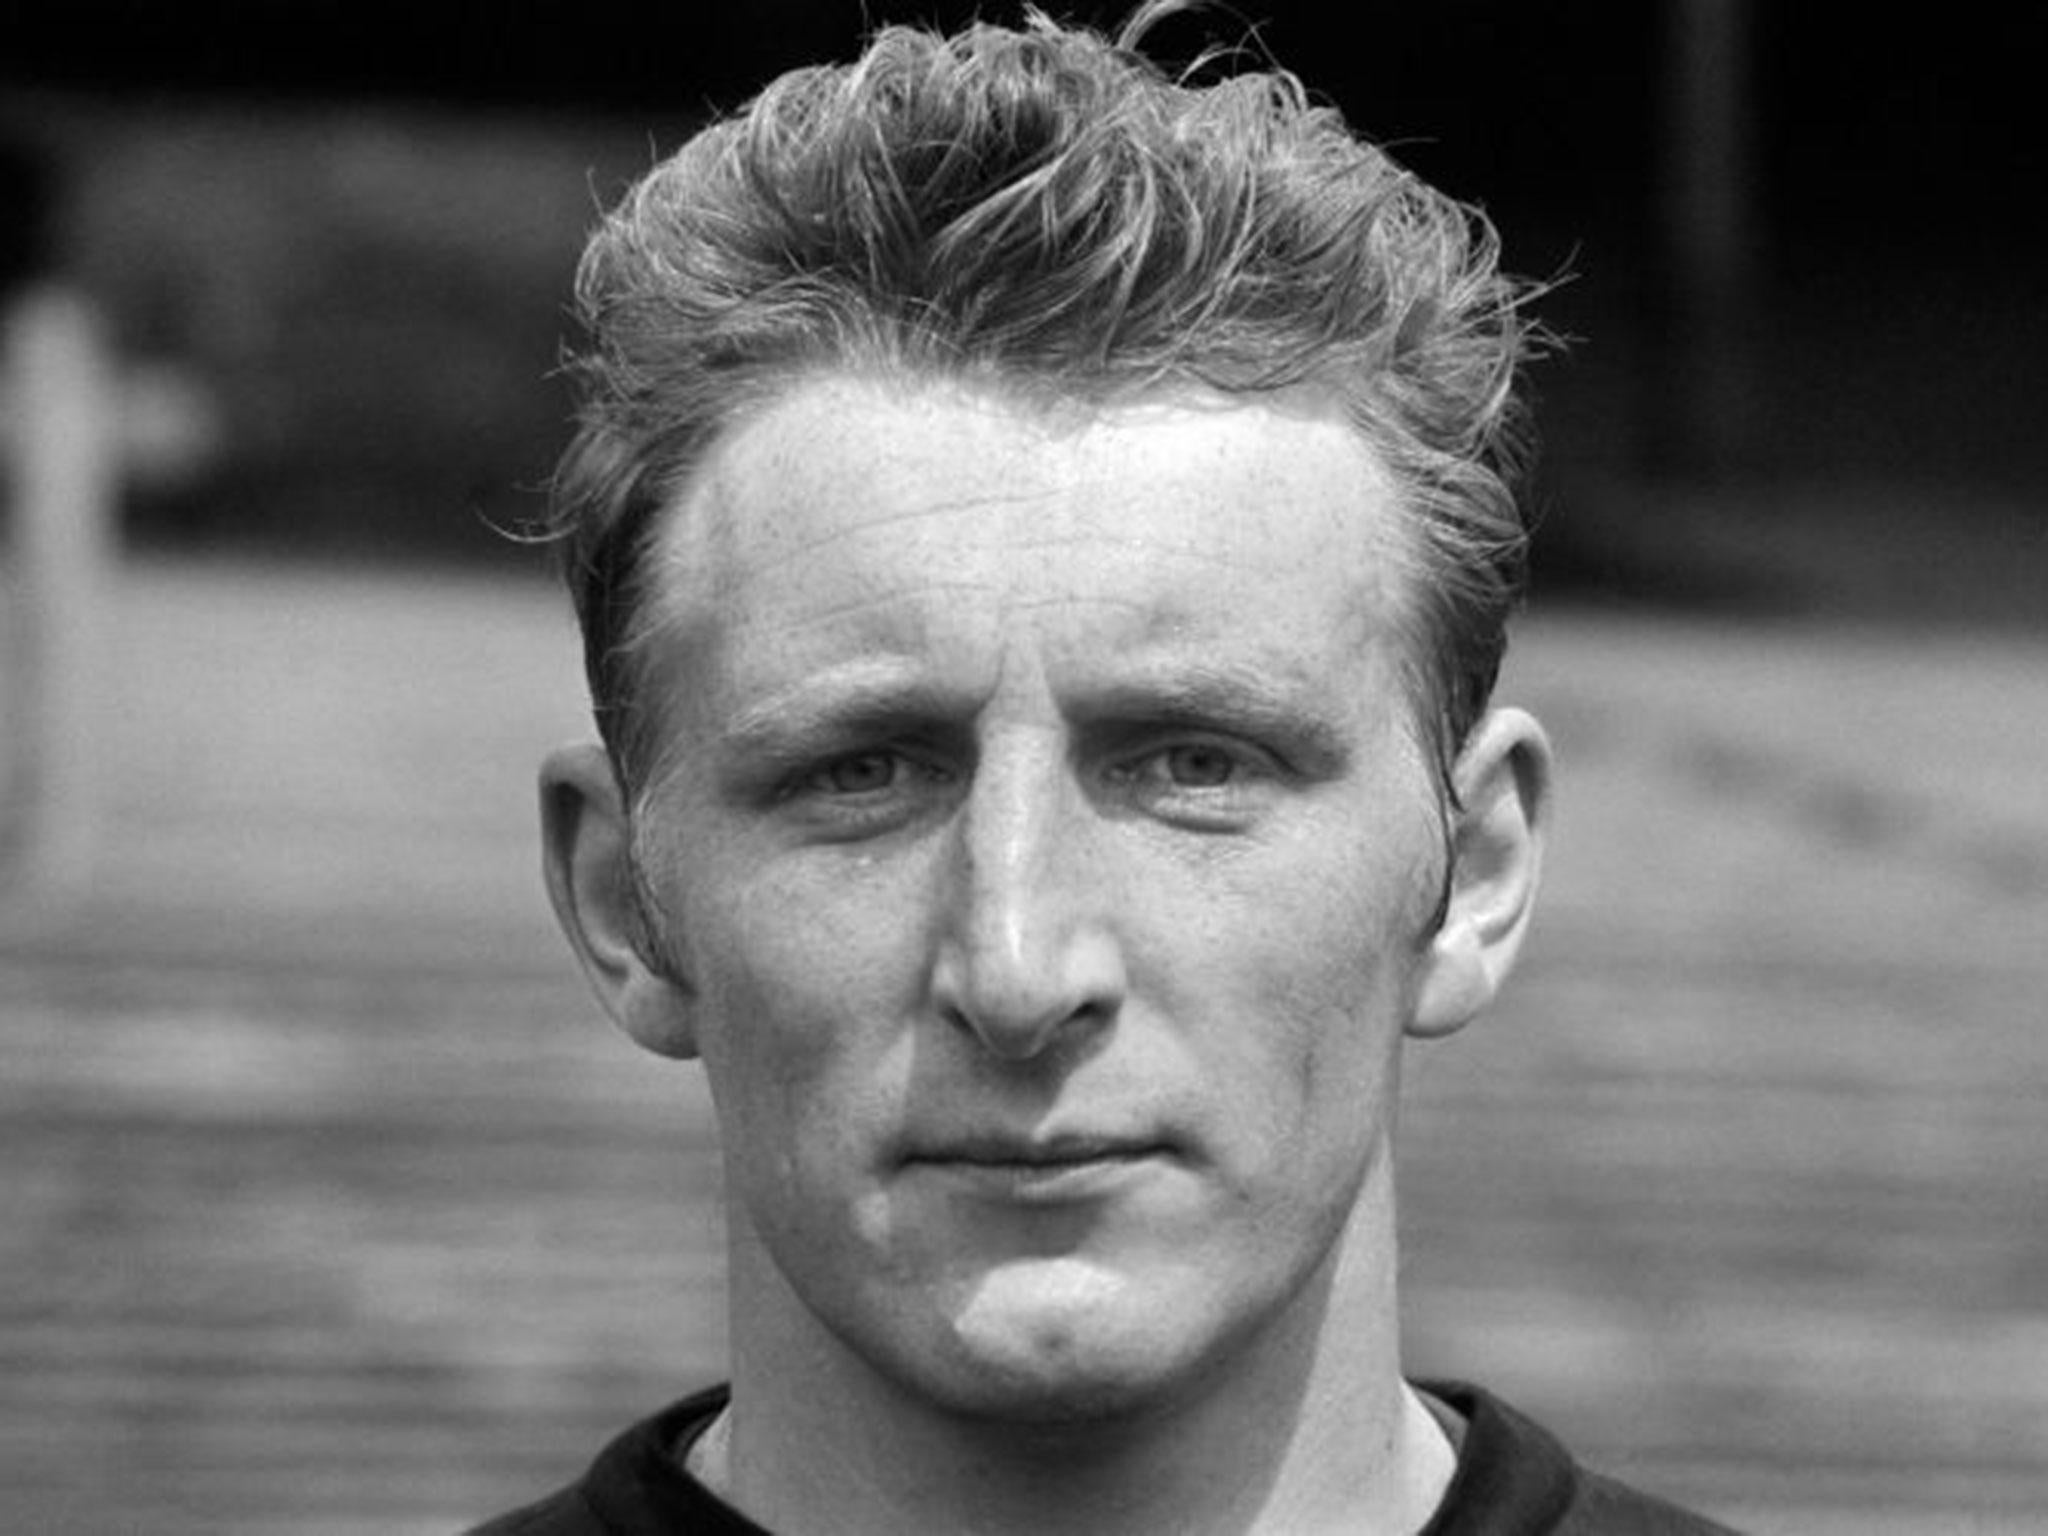 Tommy Gemmell has died at the age of 73 after a long illness